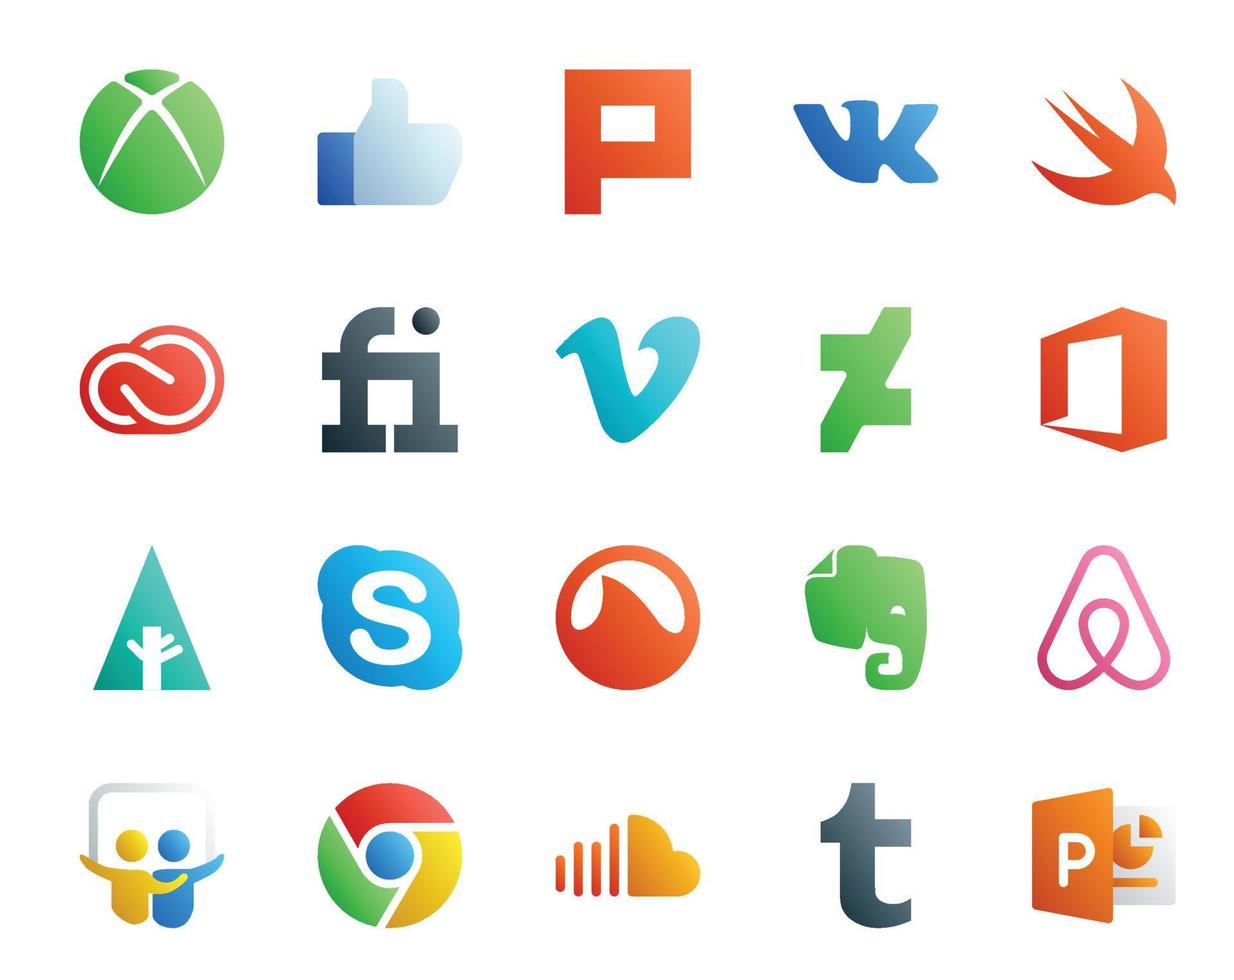 20 Social Media Icon Pack Including evernote chat fiverr skype office vector